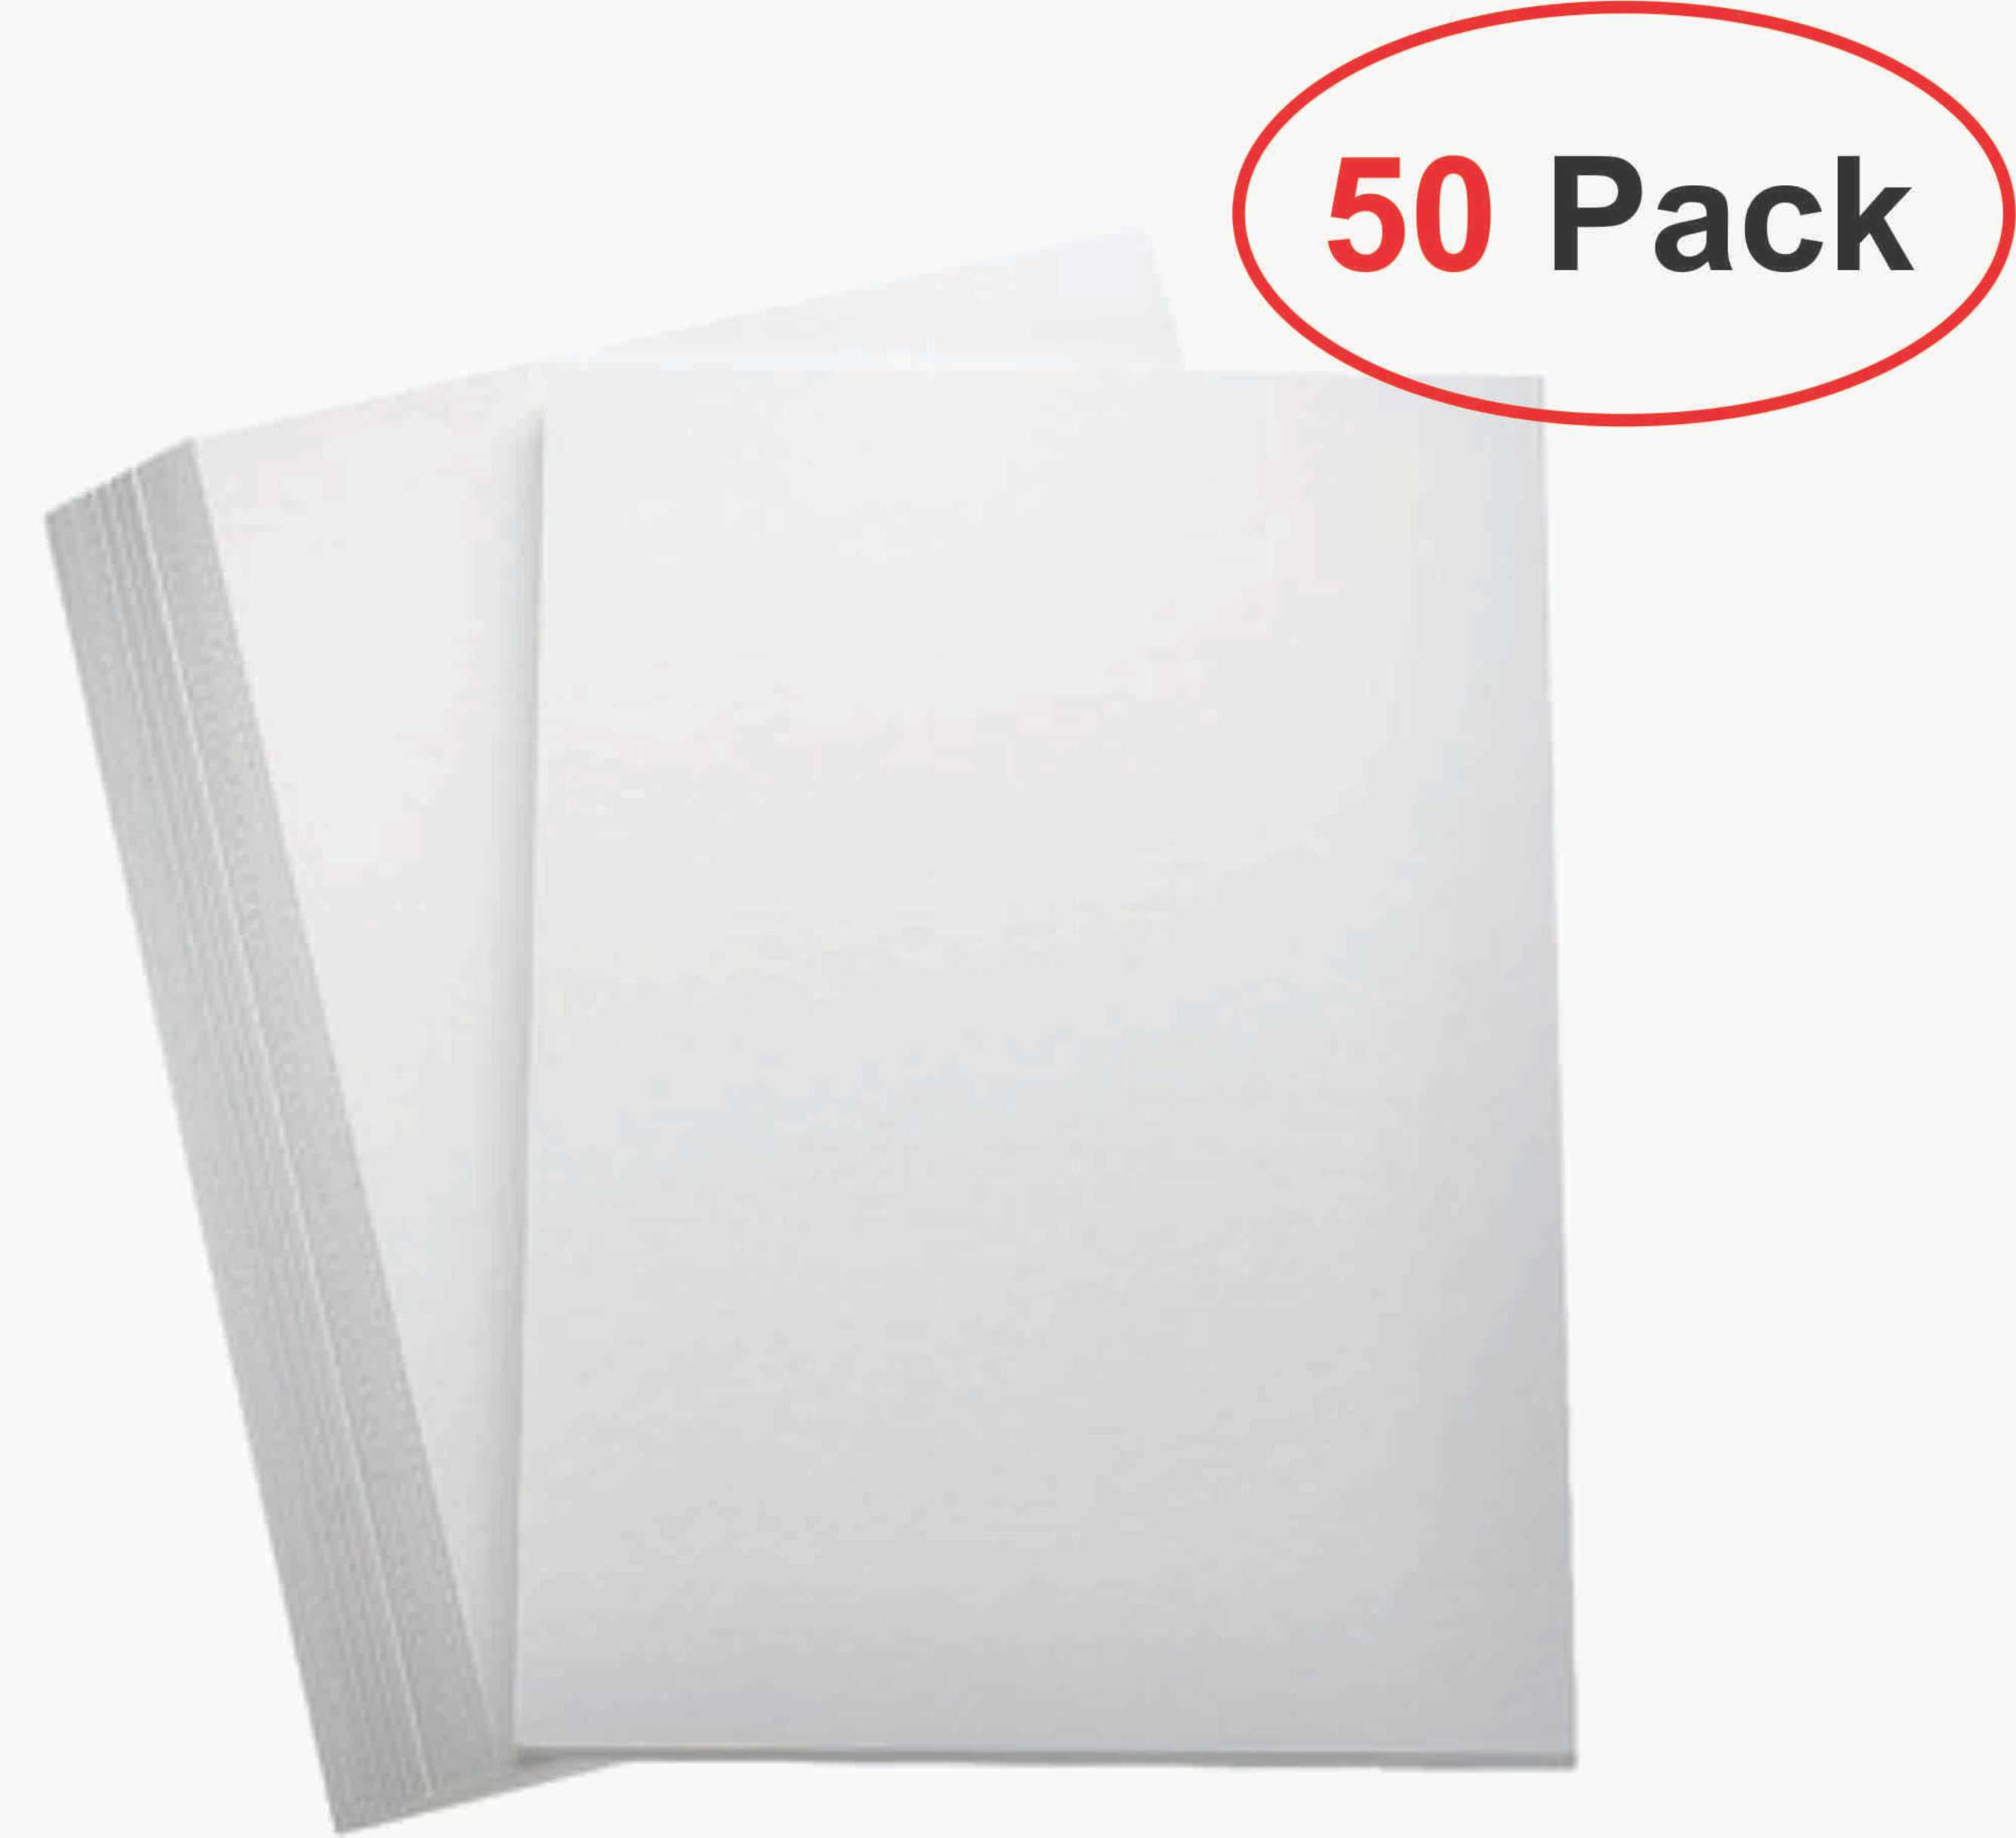 abha-envelope-size-a4-white-letter-size-envelopes-ideal-for-home-office-secure-mailing-50pcs